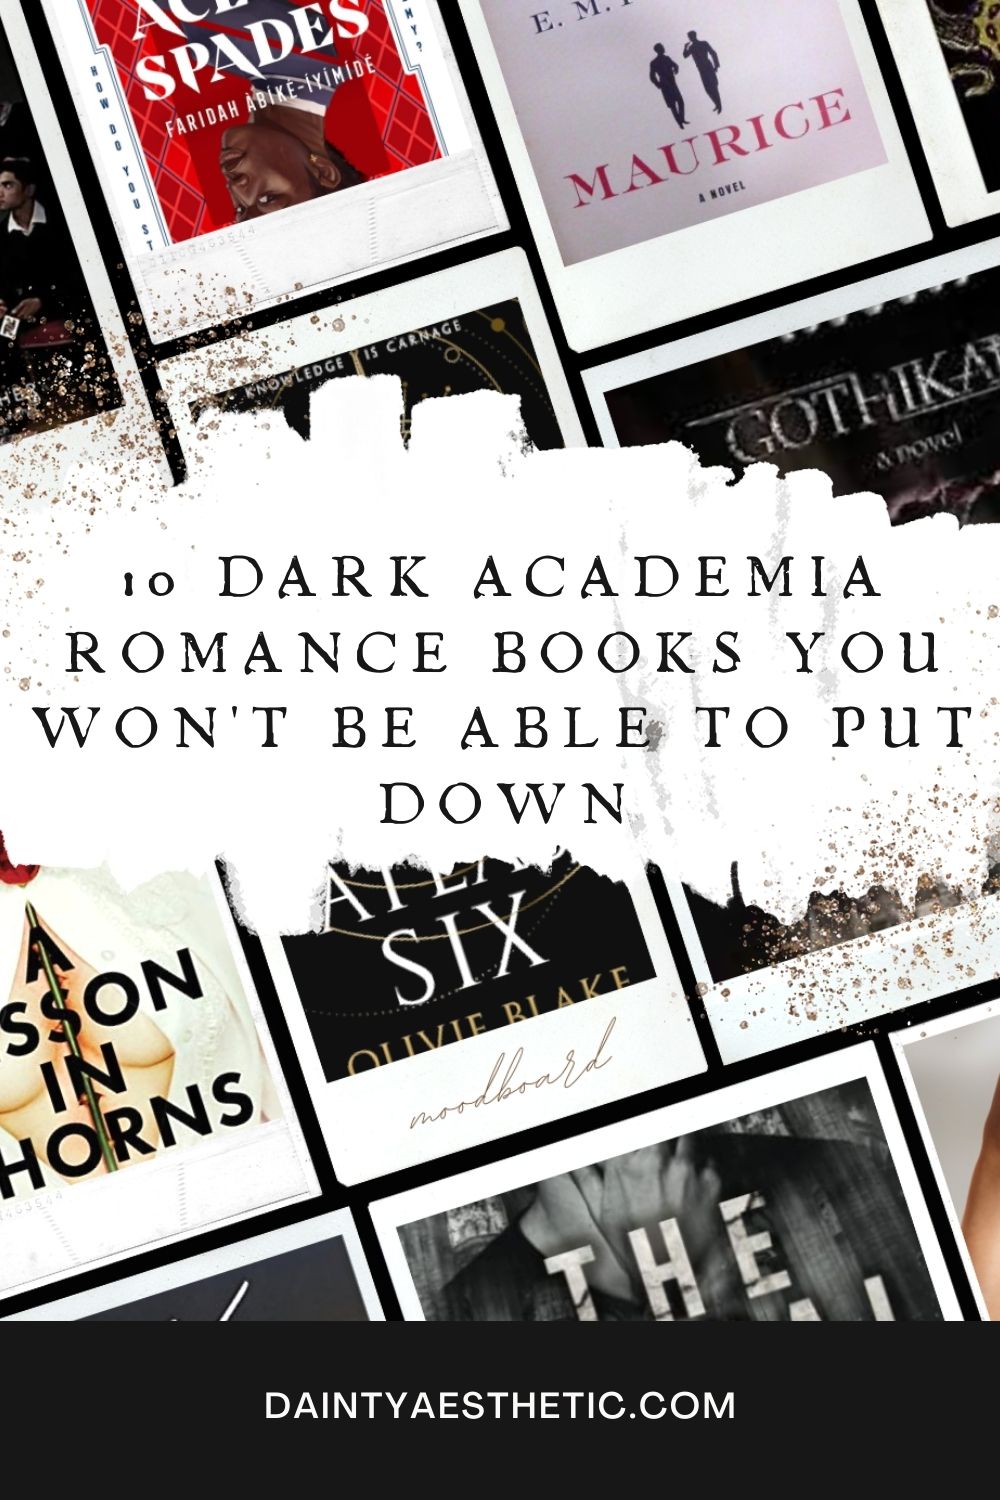 10 Dark Academia Romance Books You Won't Be Able to Put Down